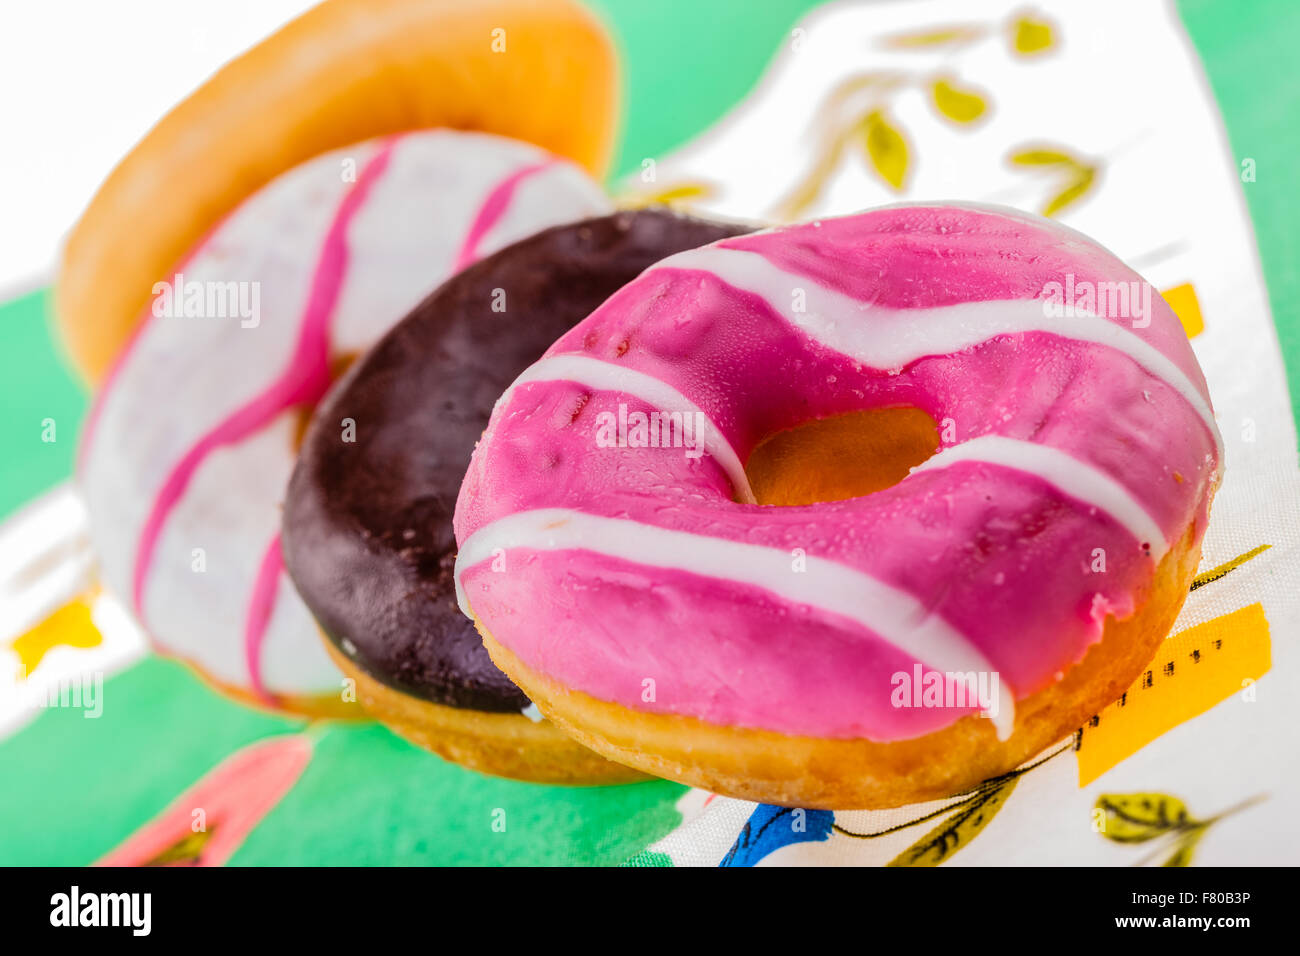 some delicious and colorful donuts on a green ornated tablecloth Stock Photo